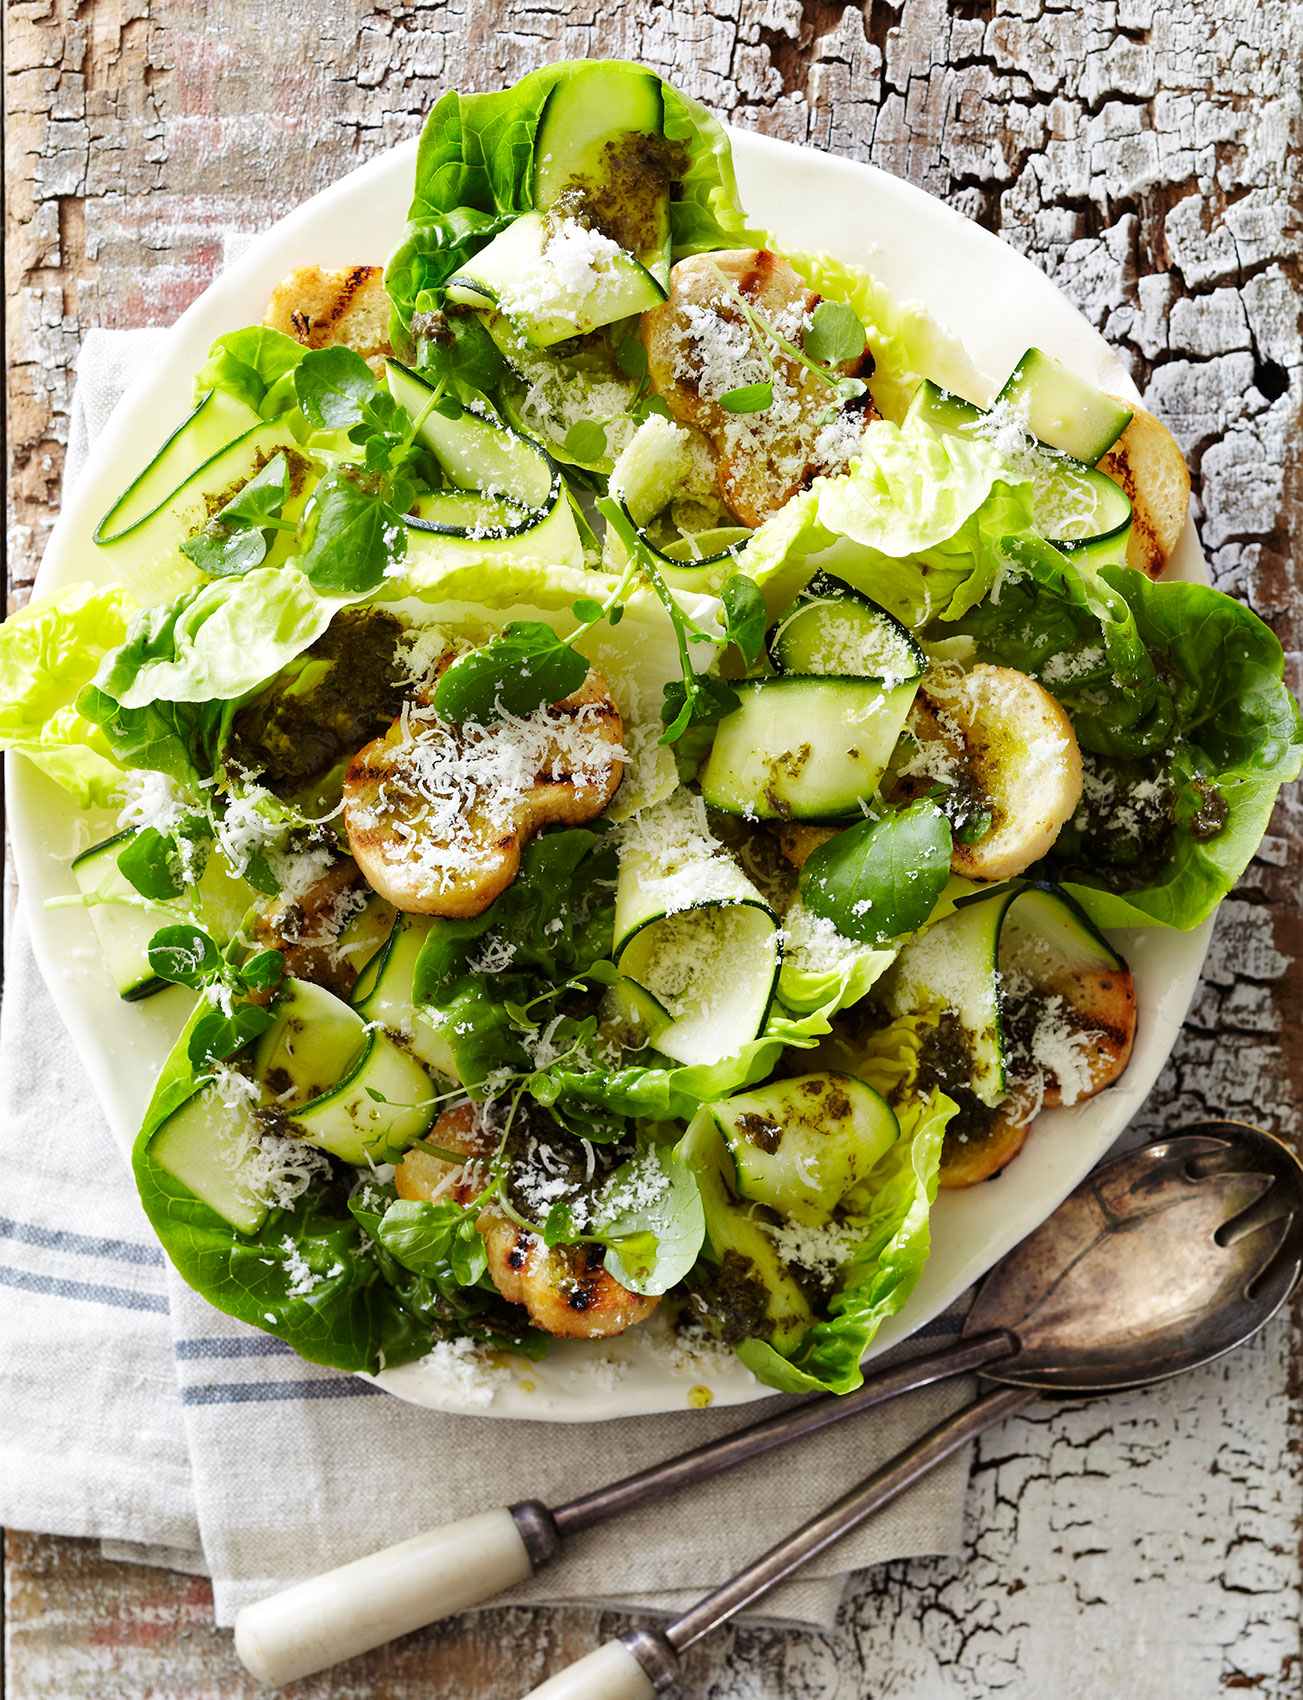 Simple Salads • Cos Zucchini Salad with Grilled Croutons & Grated Parmesan • Cookbook & Editorial Food Photography